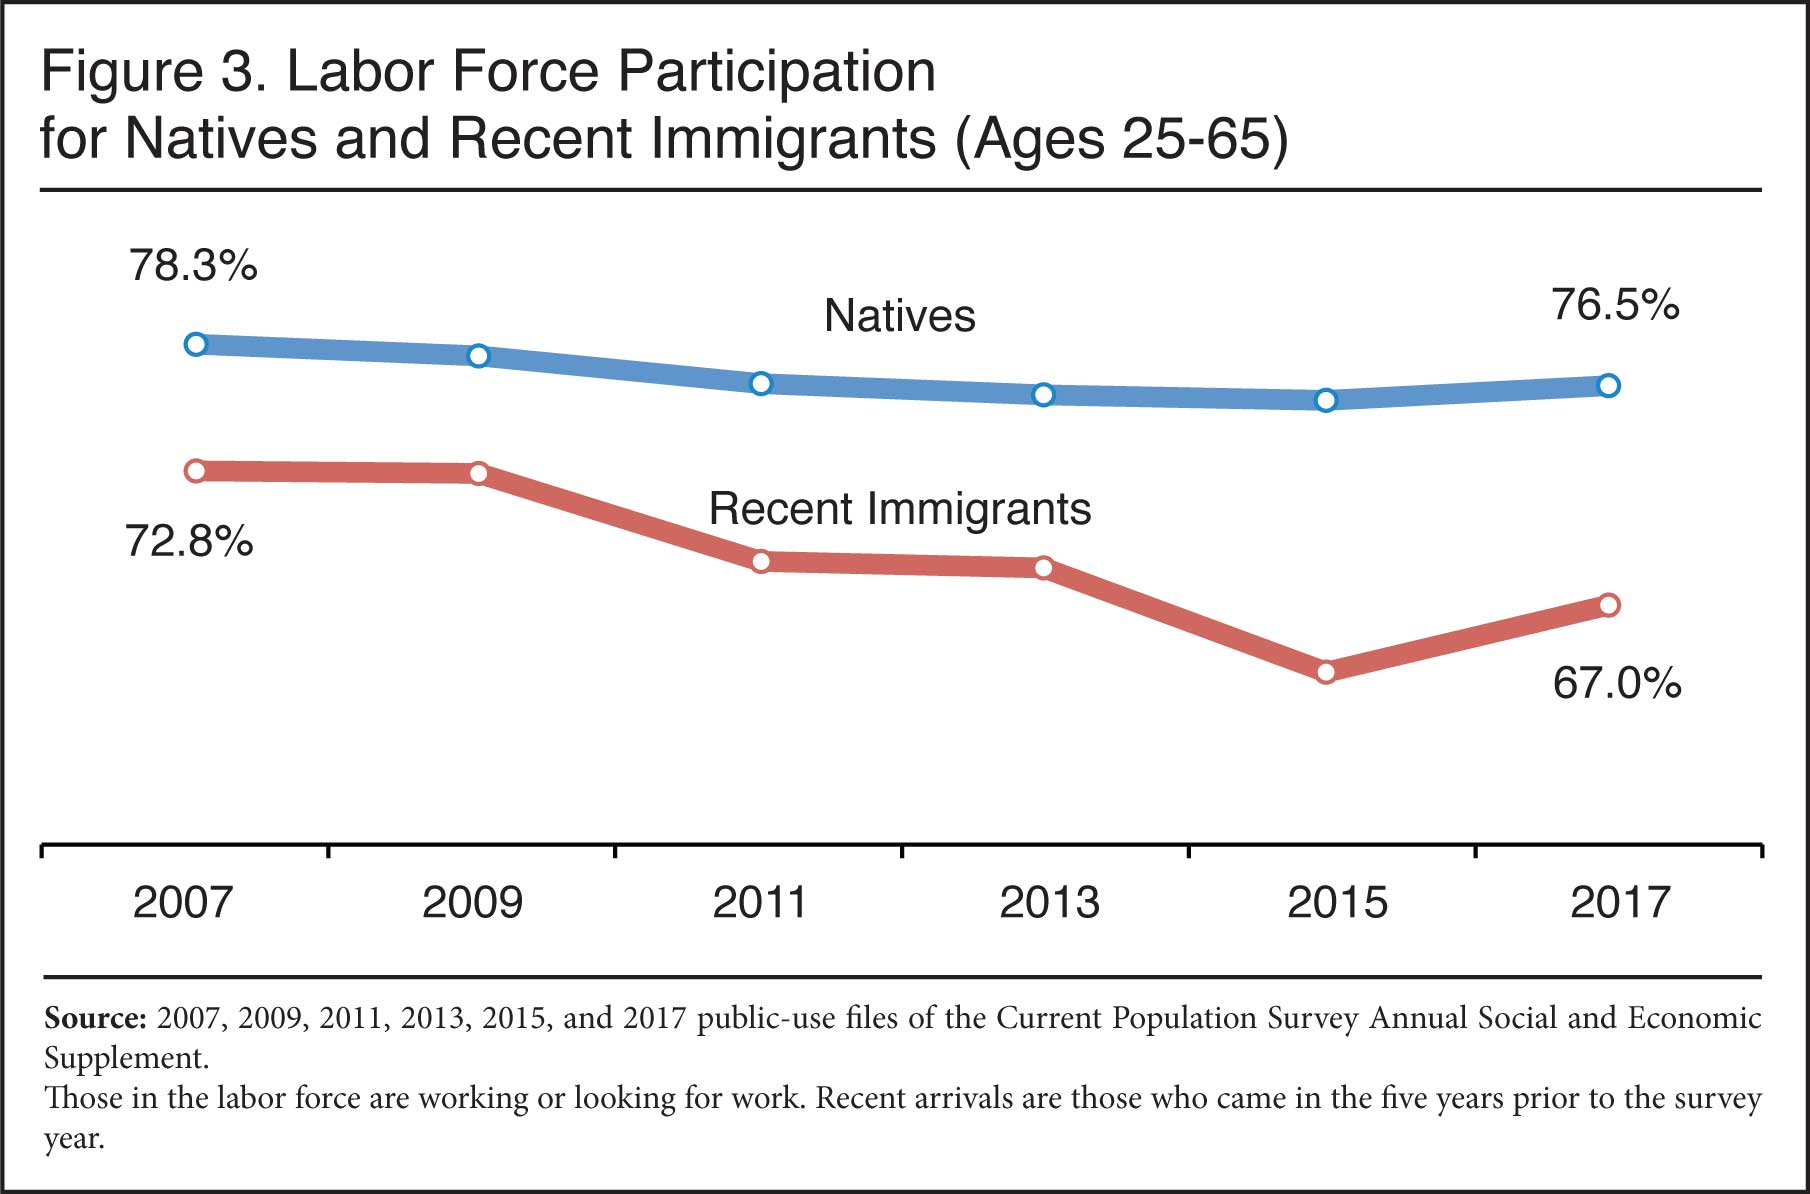 Graph: Labor Force Participation for Natives and Recent Immigrants, 2007 to 2017